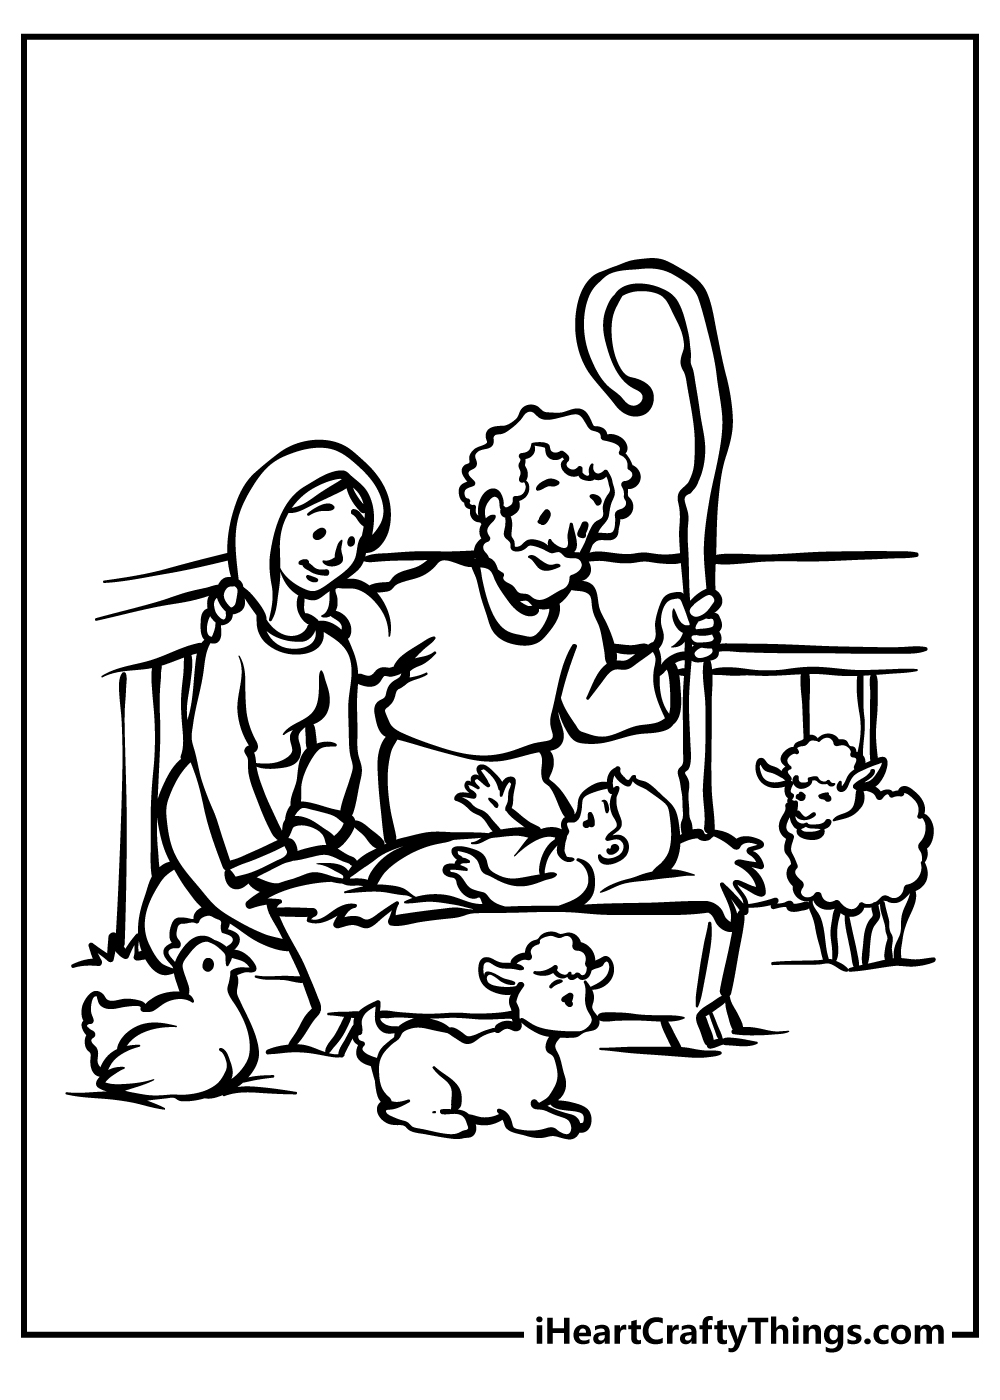 Nativity Coloring Book for adults free download